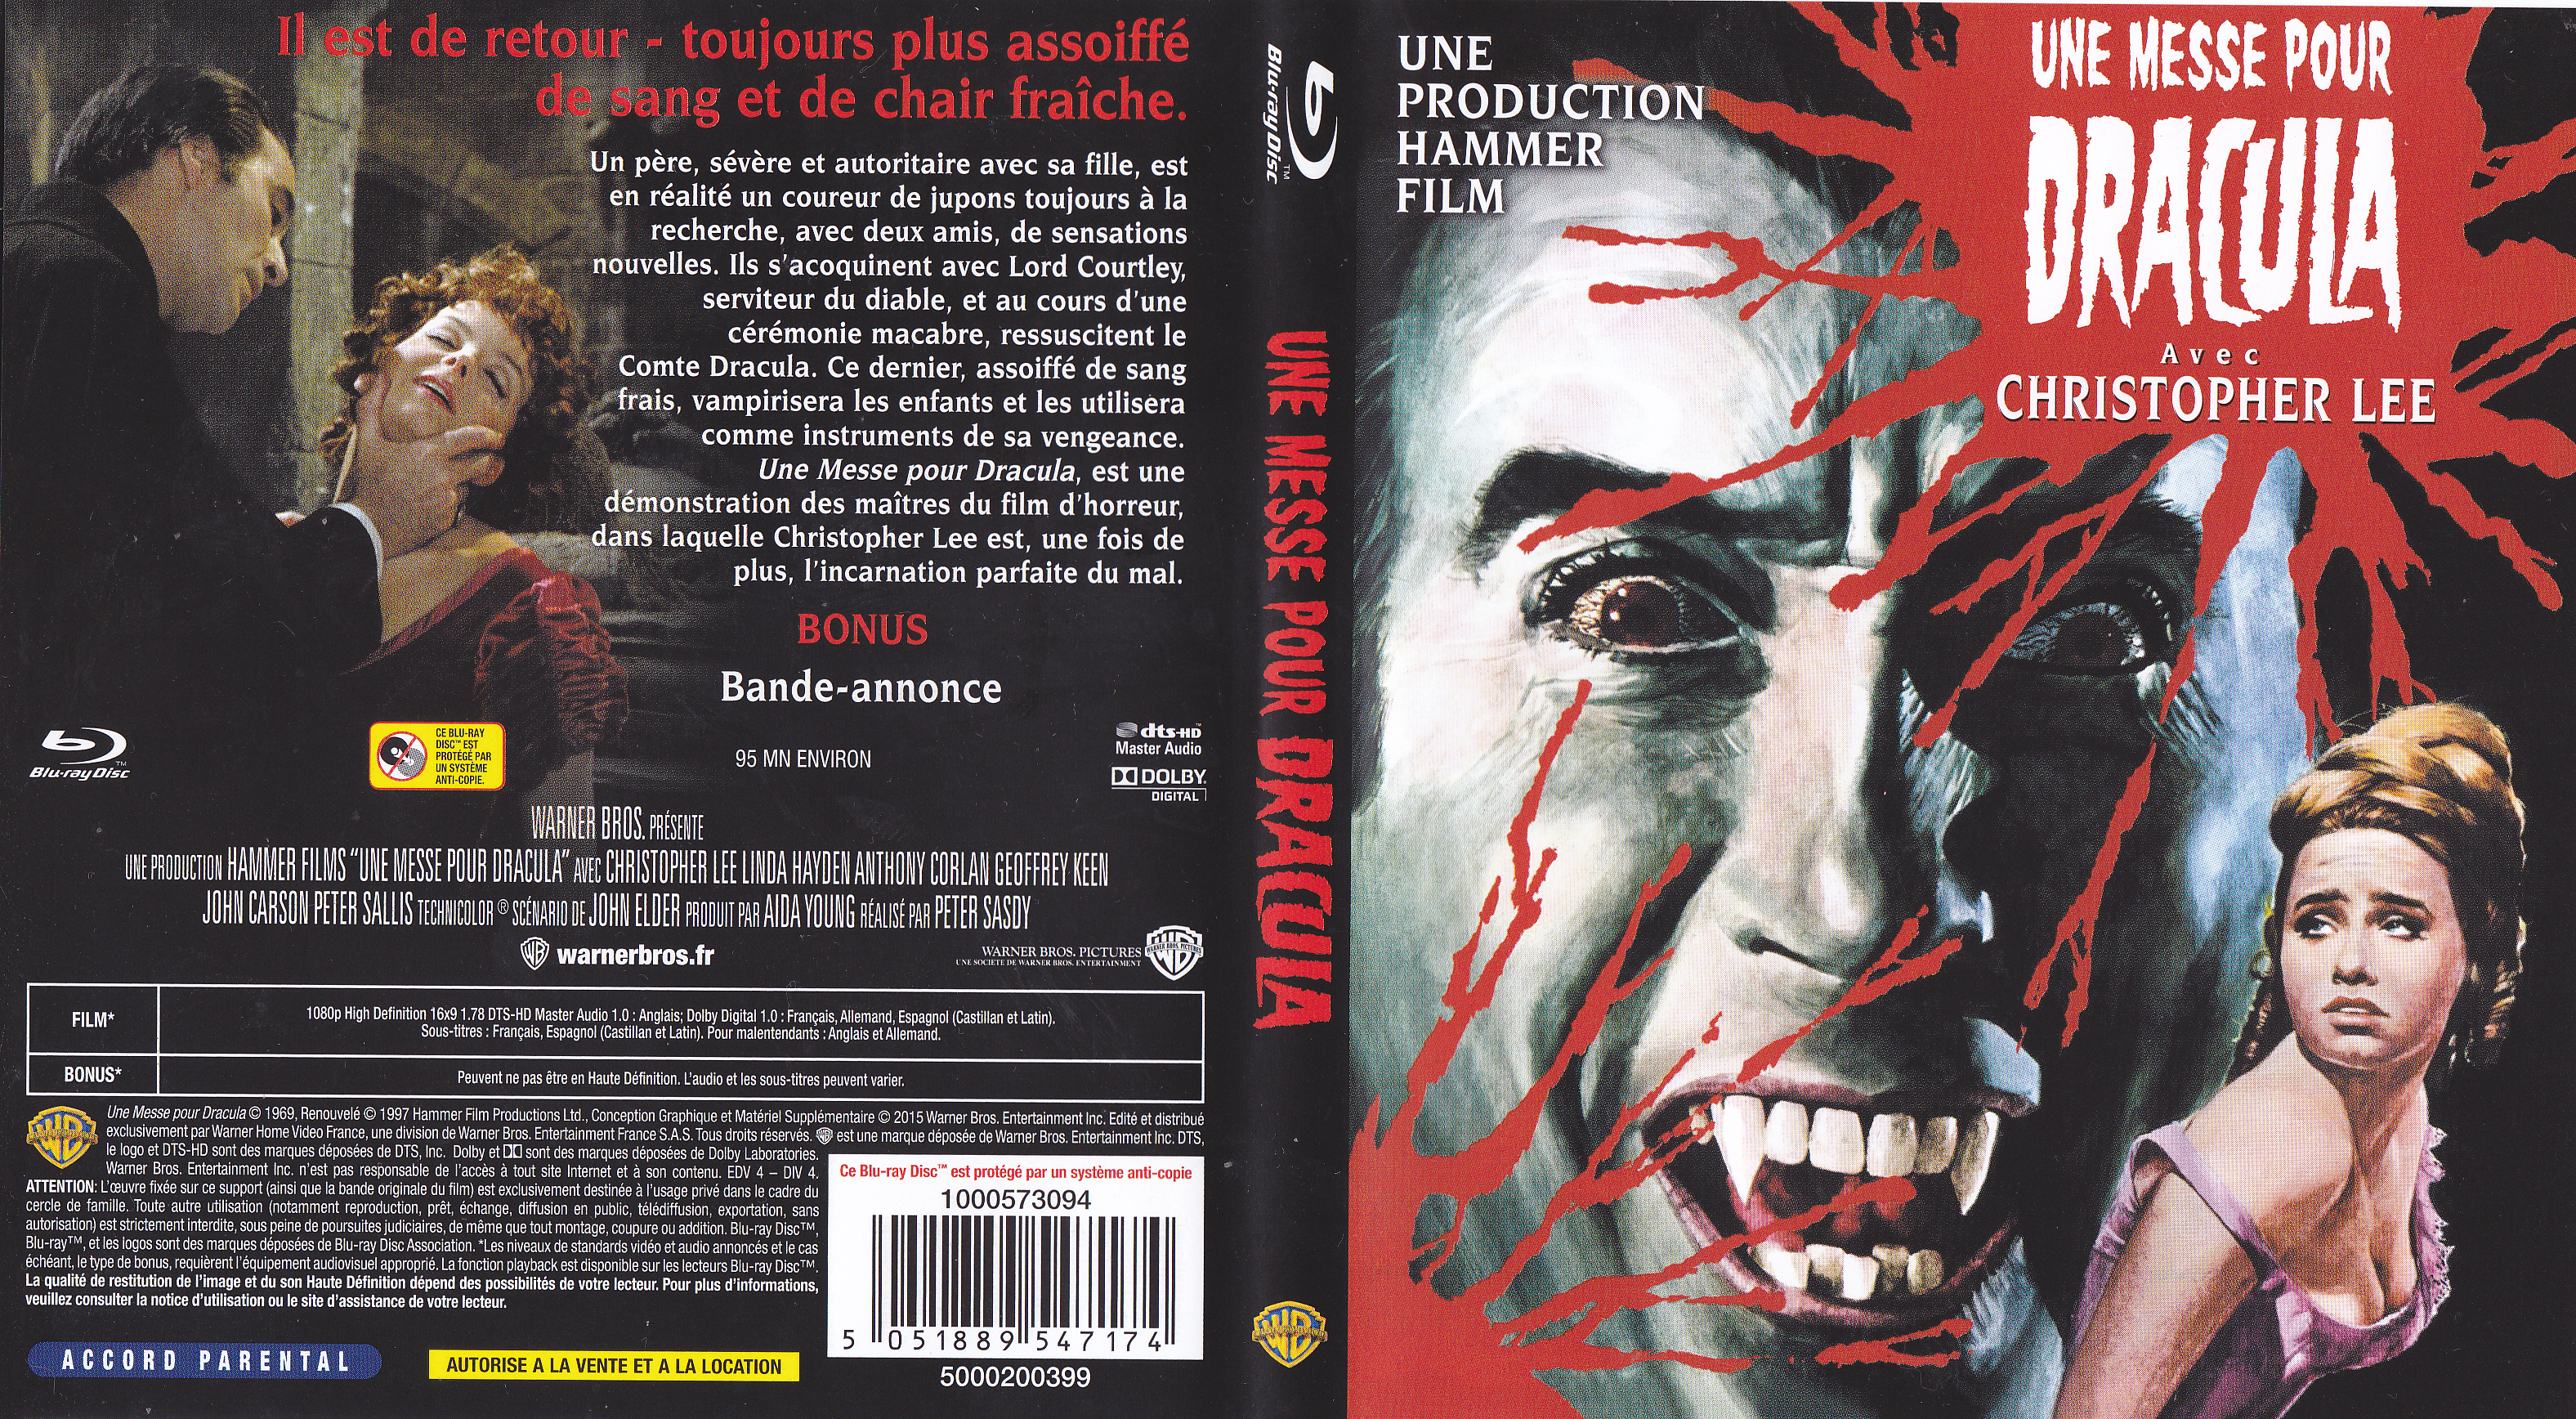 Jaquette DVD Une messe pour Dracula (BLU-RAY)